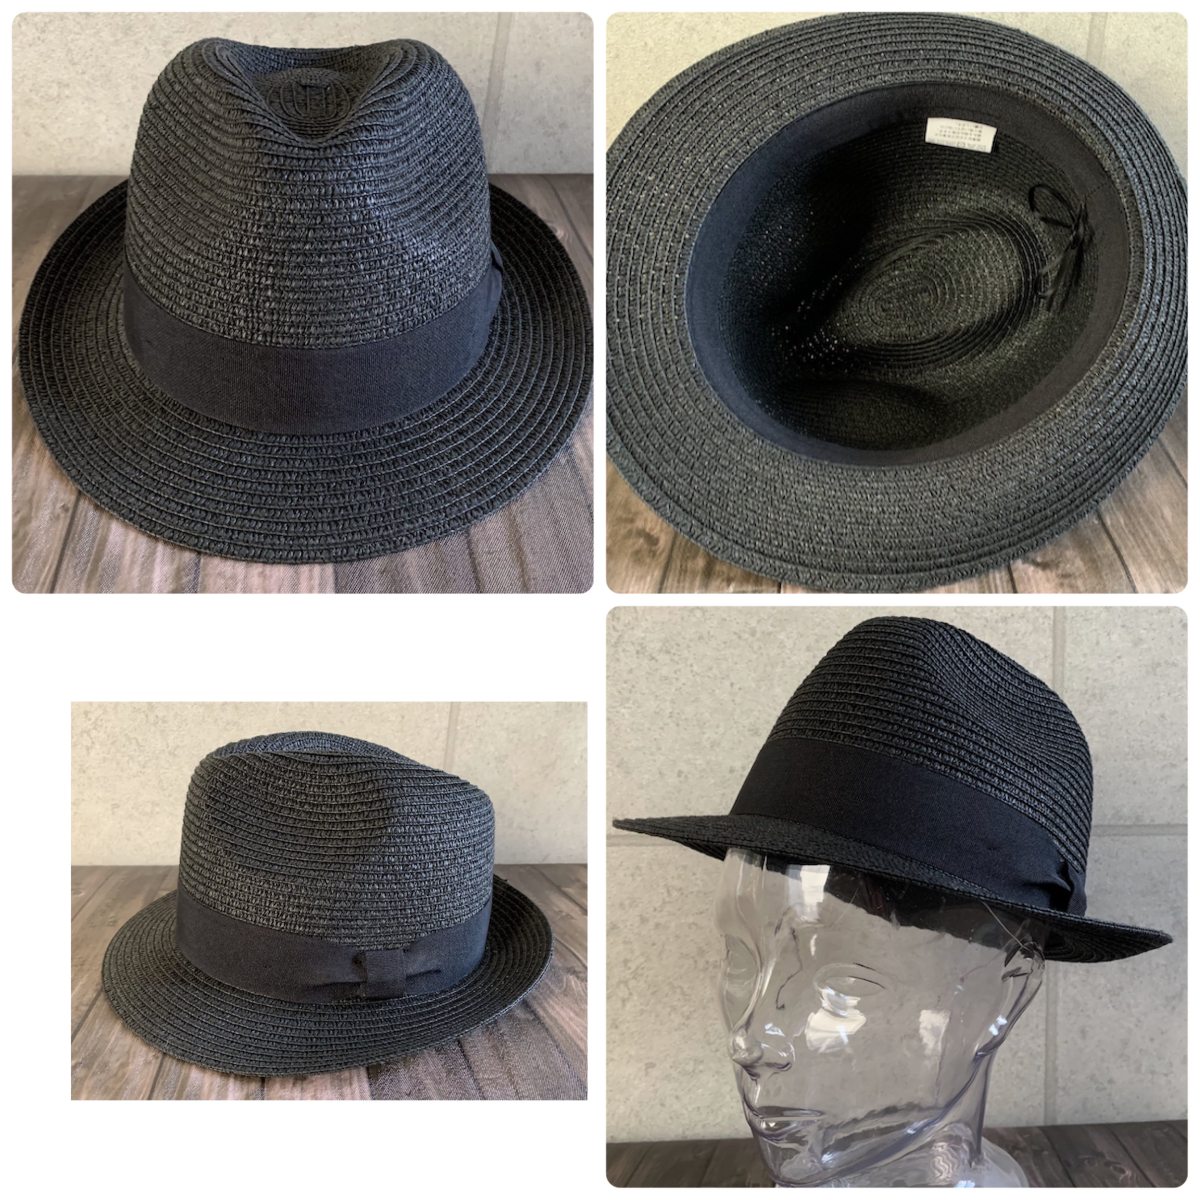 3 size development hat straw hat soft hat hat folding size adjustment . therefore . hat simple M L XL size man and woman use [ shop inside commodity 2 point and more . buy free shipping ]